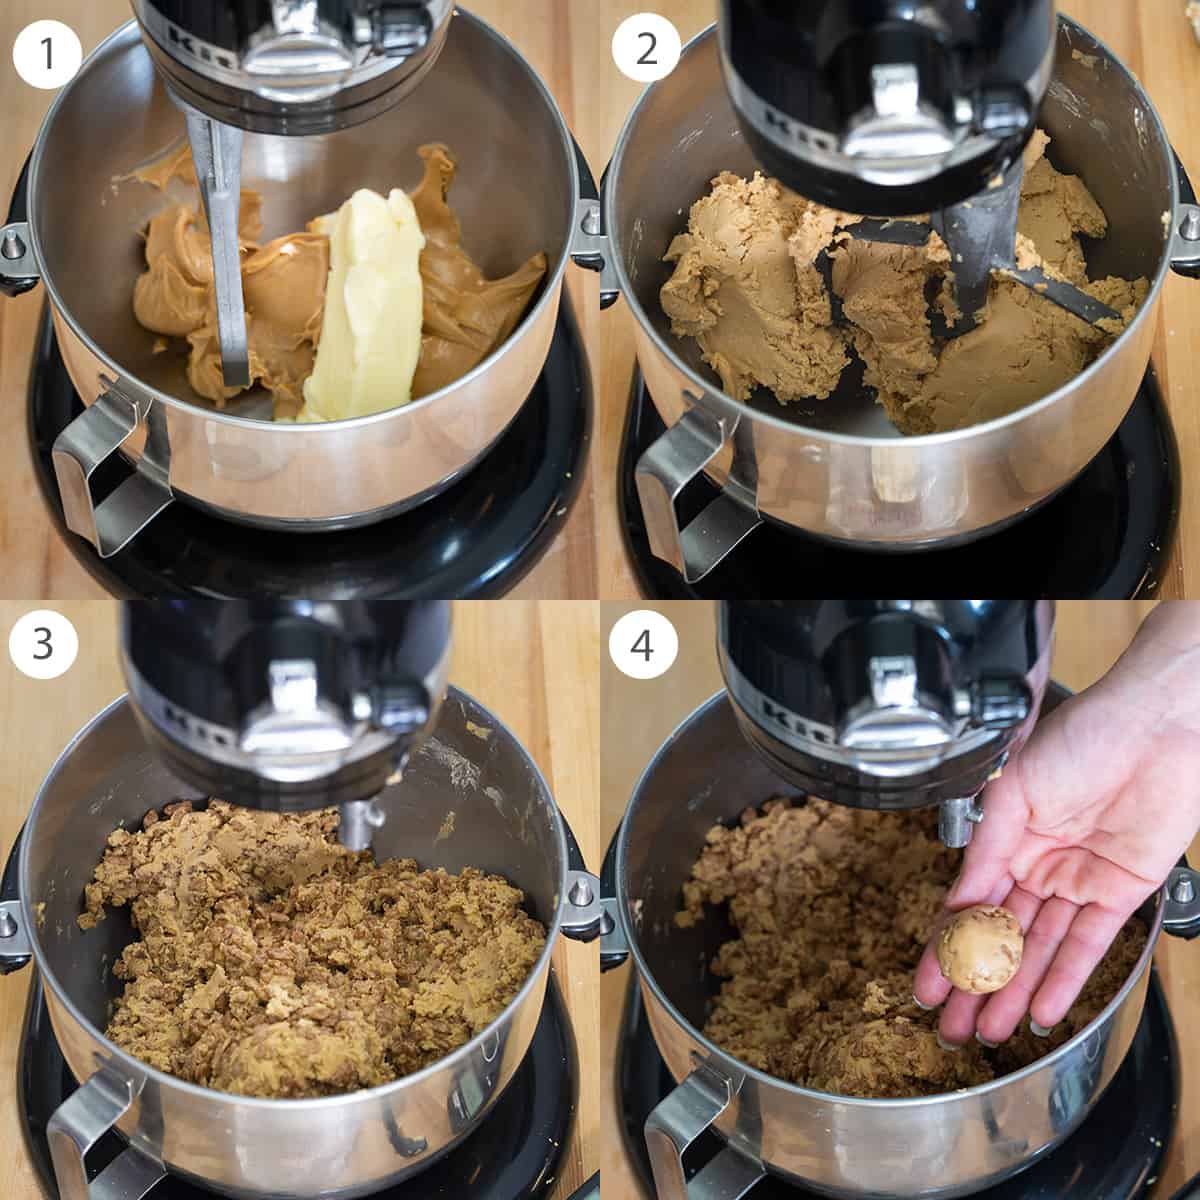 Steps for making peanut butter ball dough including mixing and rolling the balls.